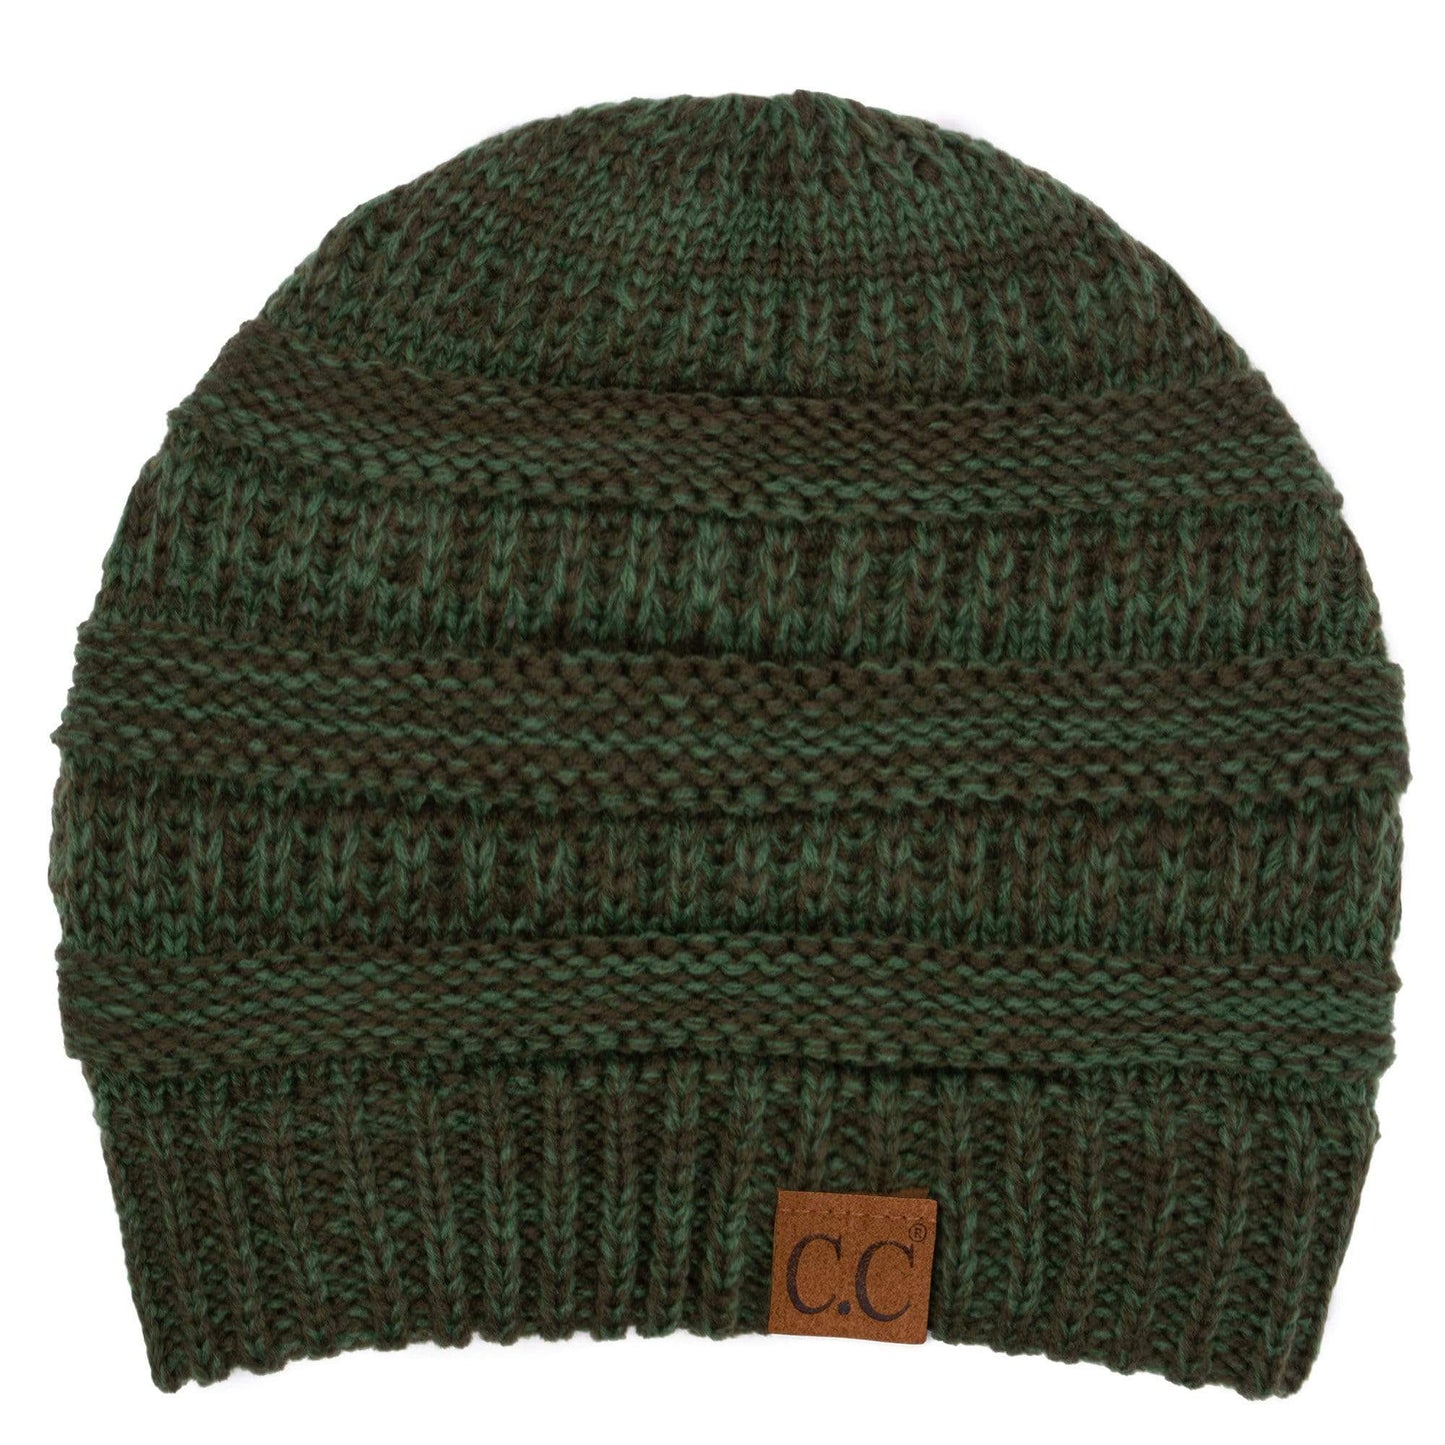 Keebon International Apparel Two Tone Olive C.C Trendy Warm Chunky Soft Stretch Two-Toned Cable Knit Beanie Skully